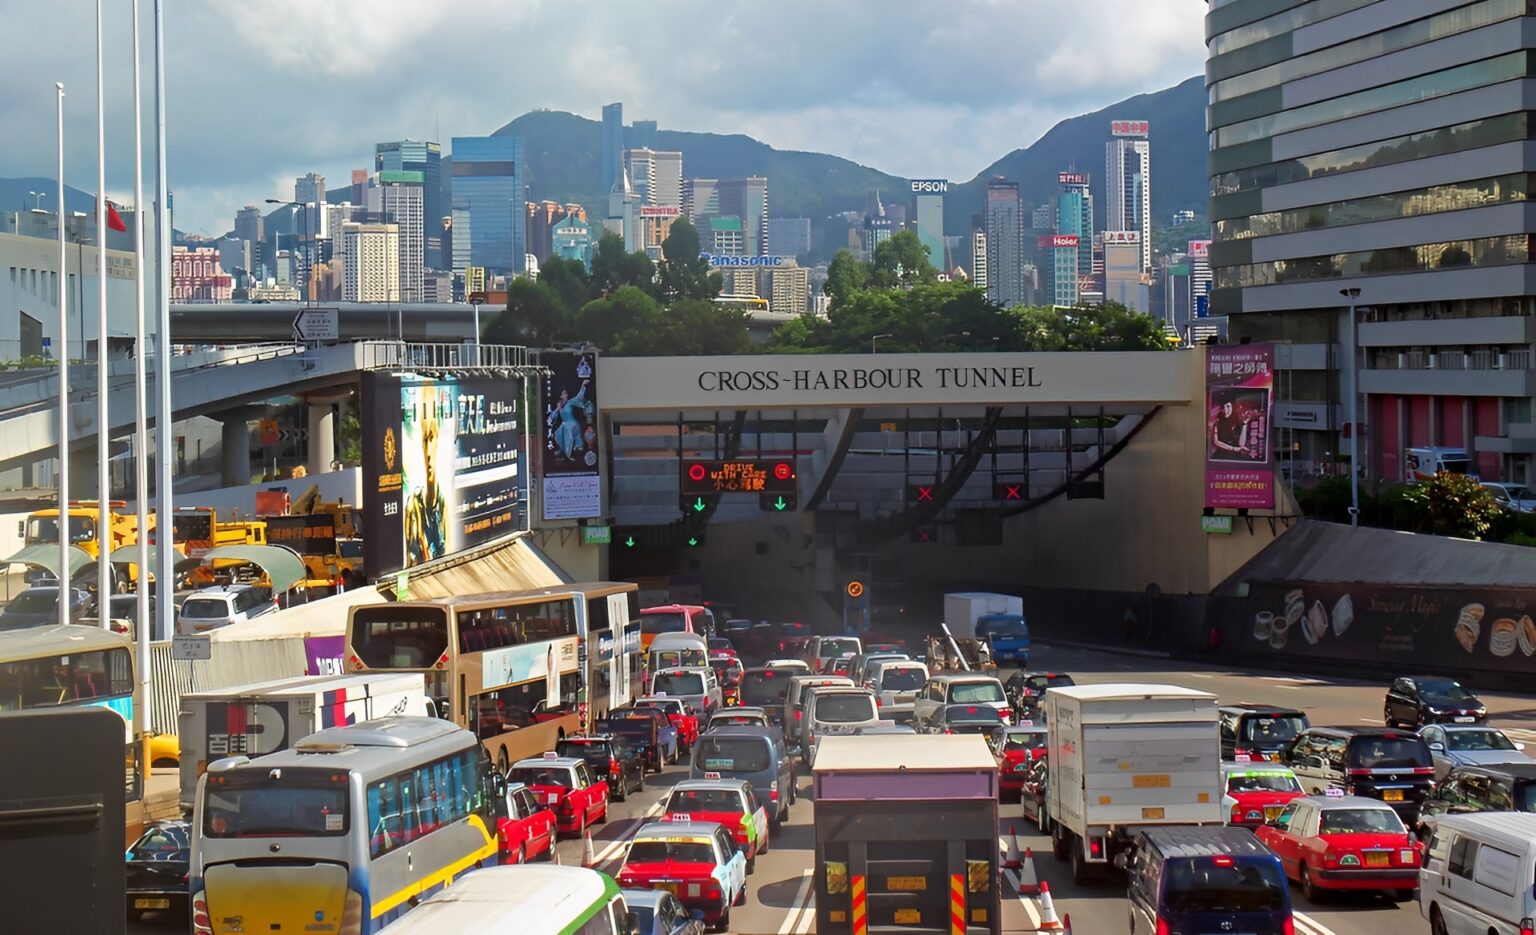 Toll changes for cross-harbour tunnels in Hong Kong